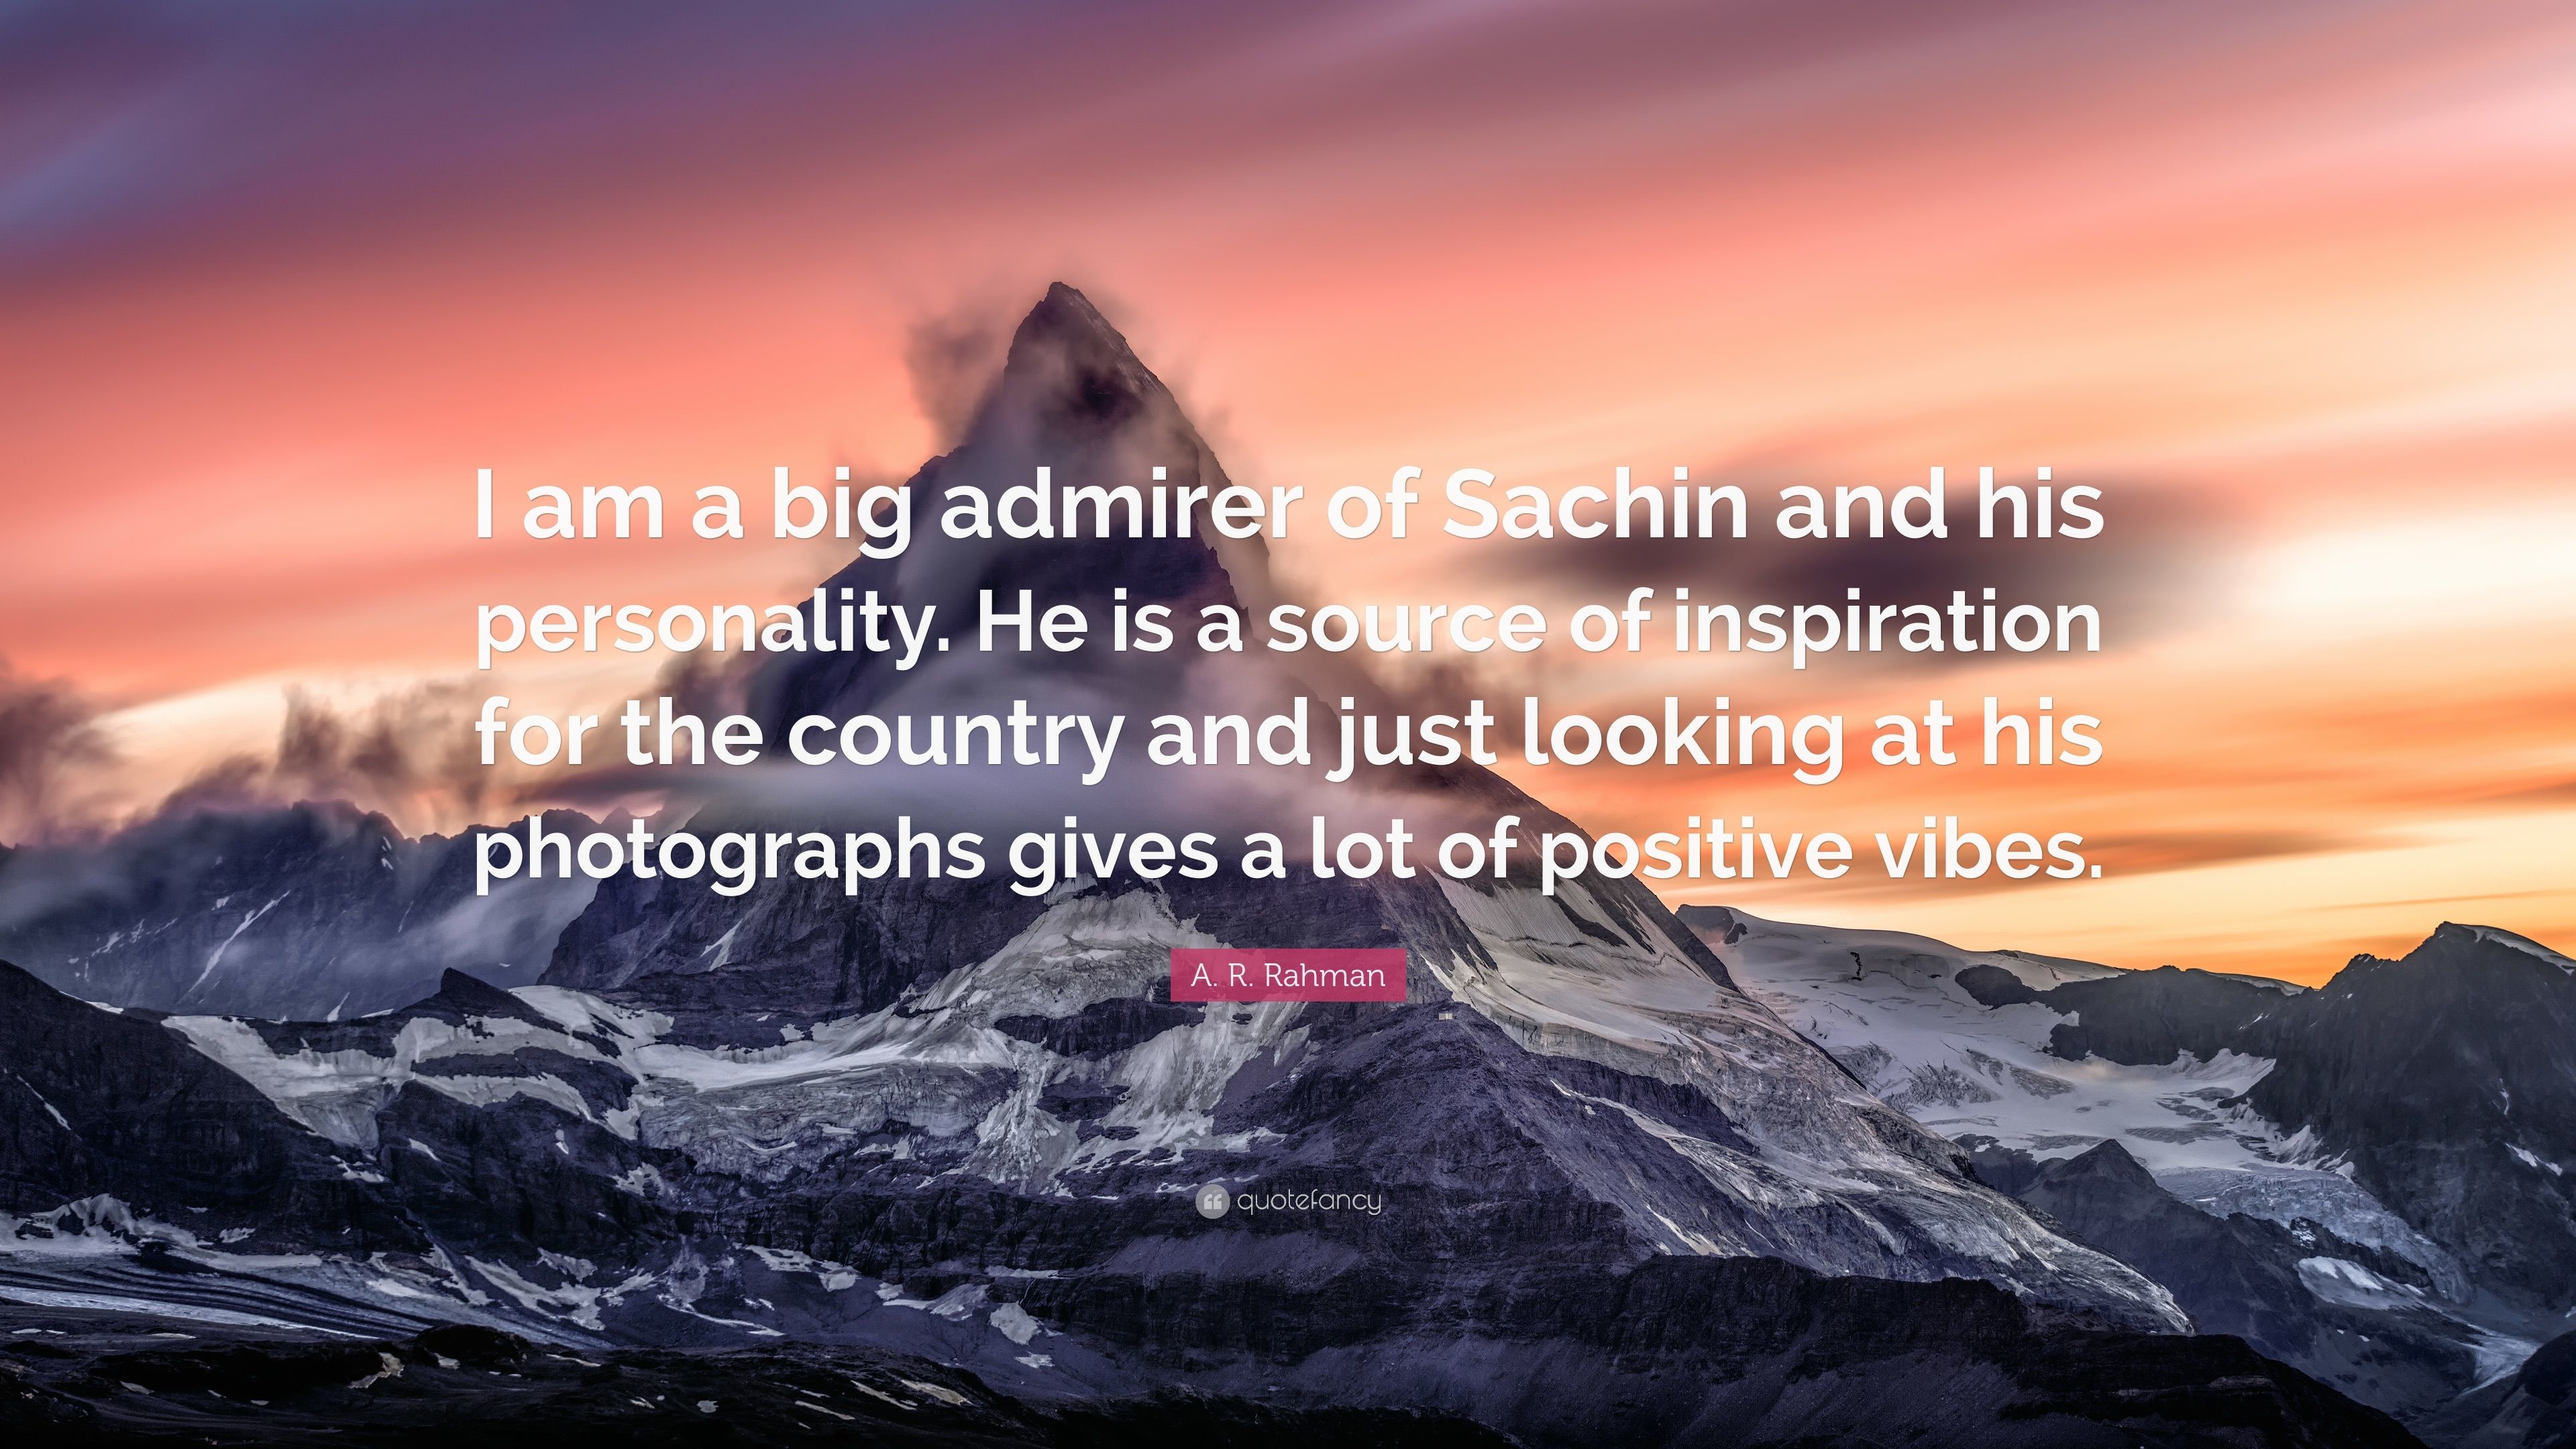 3840x2160 A. R. Rahman Quote: “I am a big admirer of Sachin and his personality.